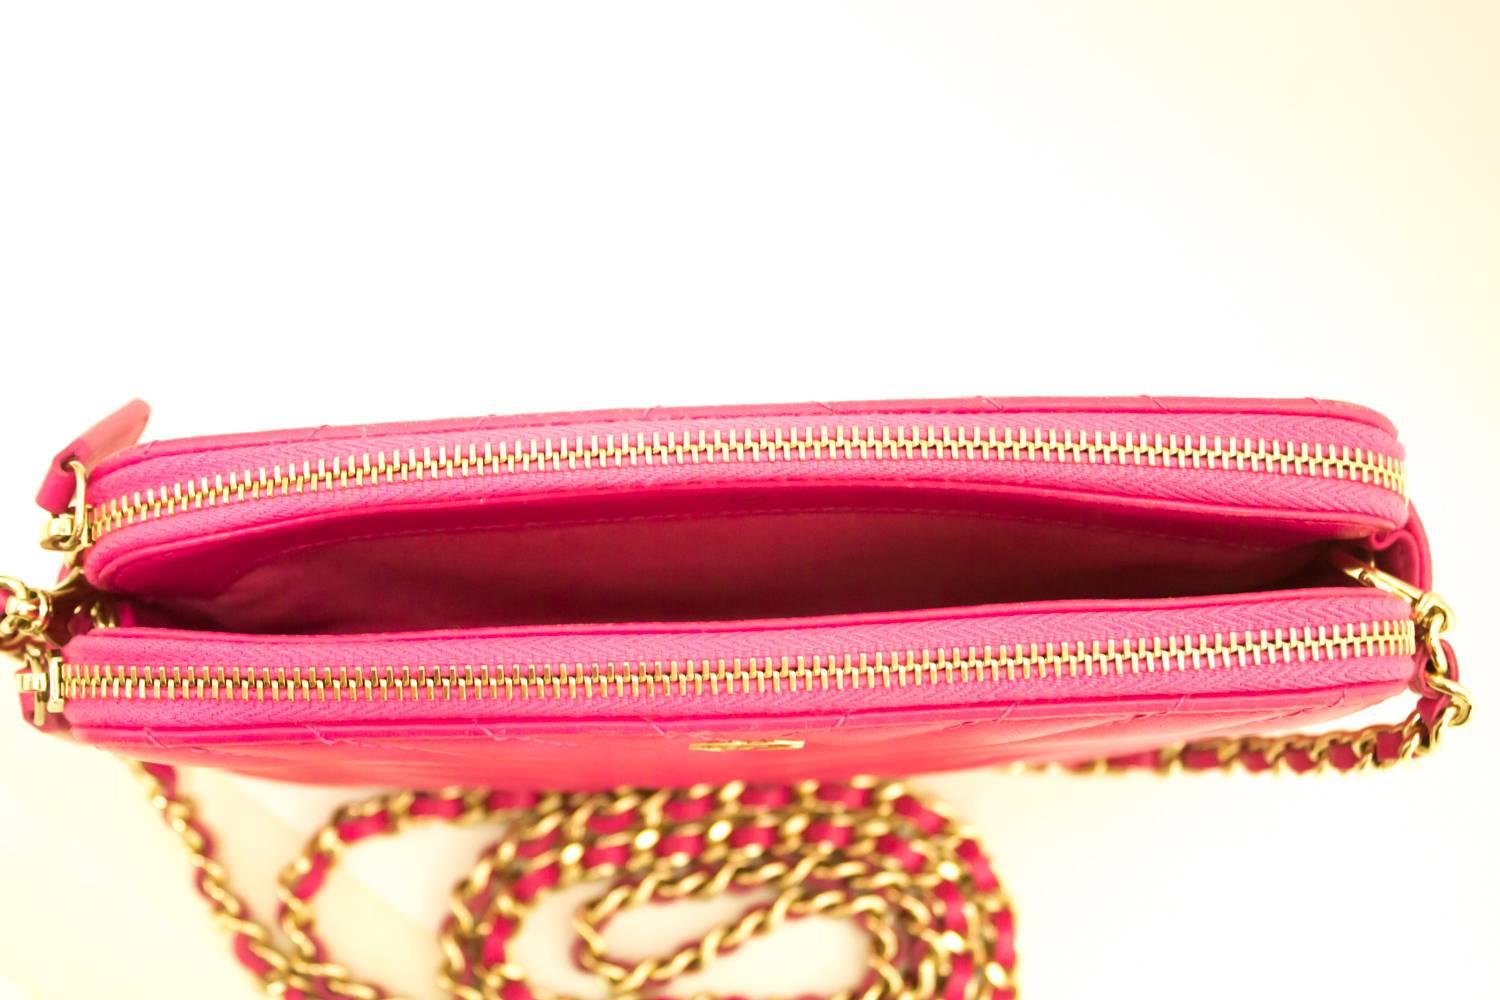 An authentic CHANEL Hot Pink Wallet On Chain WOC Double Zip Chain Shoulder Bag The outside material is made of black Lambskin.
Conditions & Ratings
Outside material: Lambskin
Color: Hot Pink
Closure: Zipper
Hardware and chain: Gold-tone
Made in